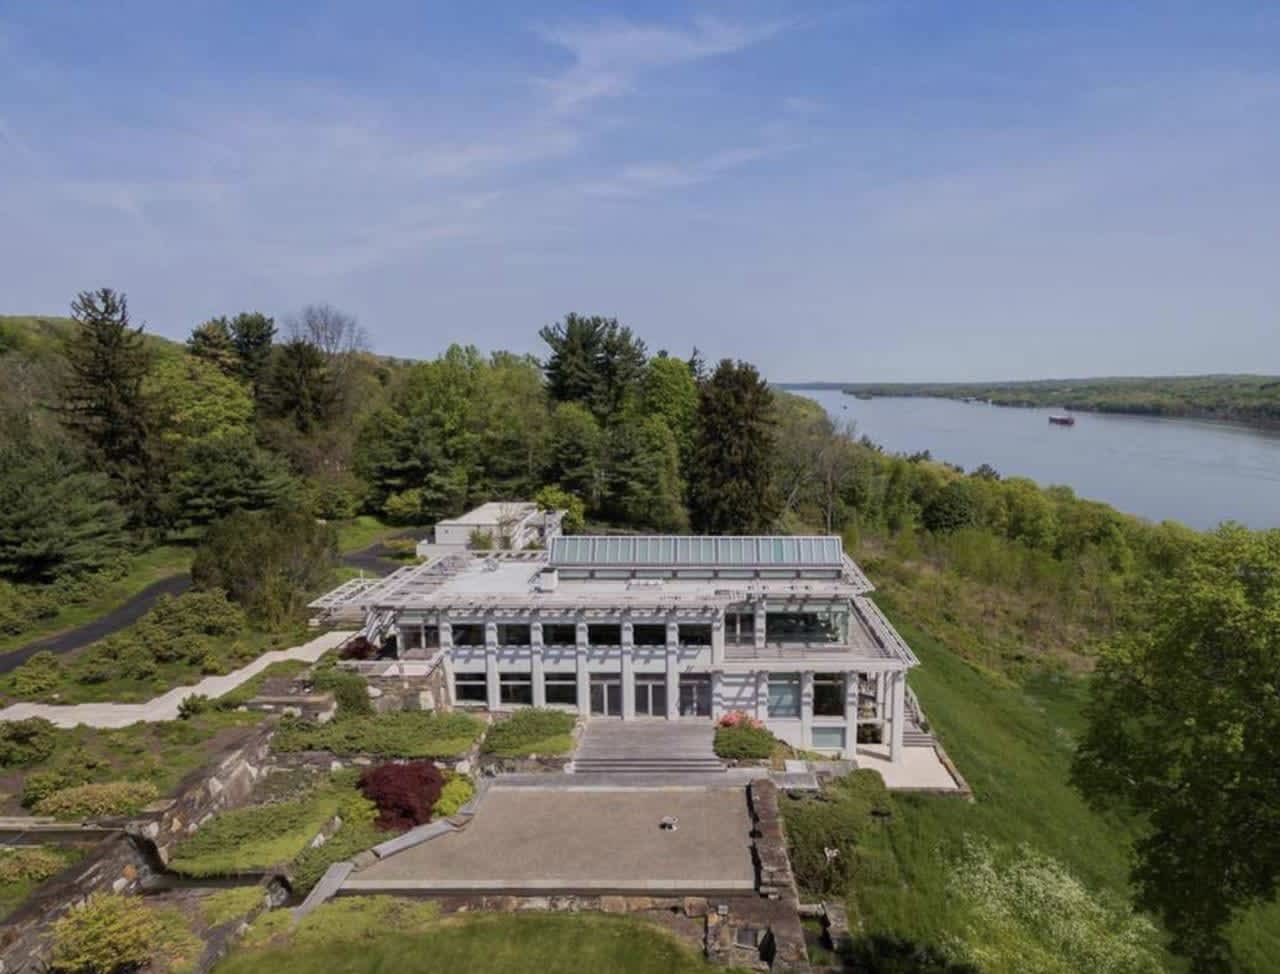 For those with full pockets, a $5.55 million estate is for sale in Ulster County.